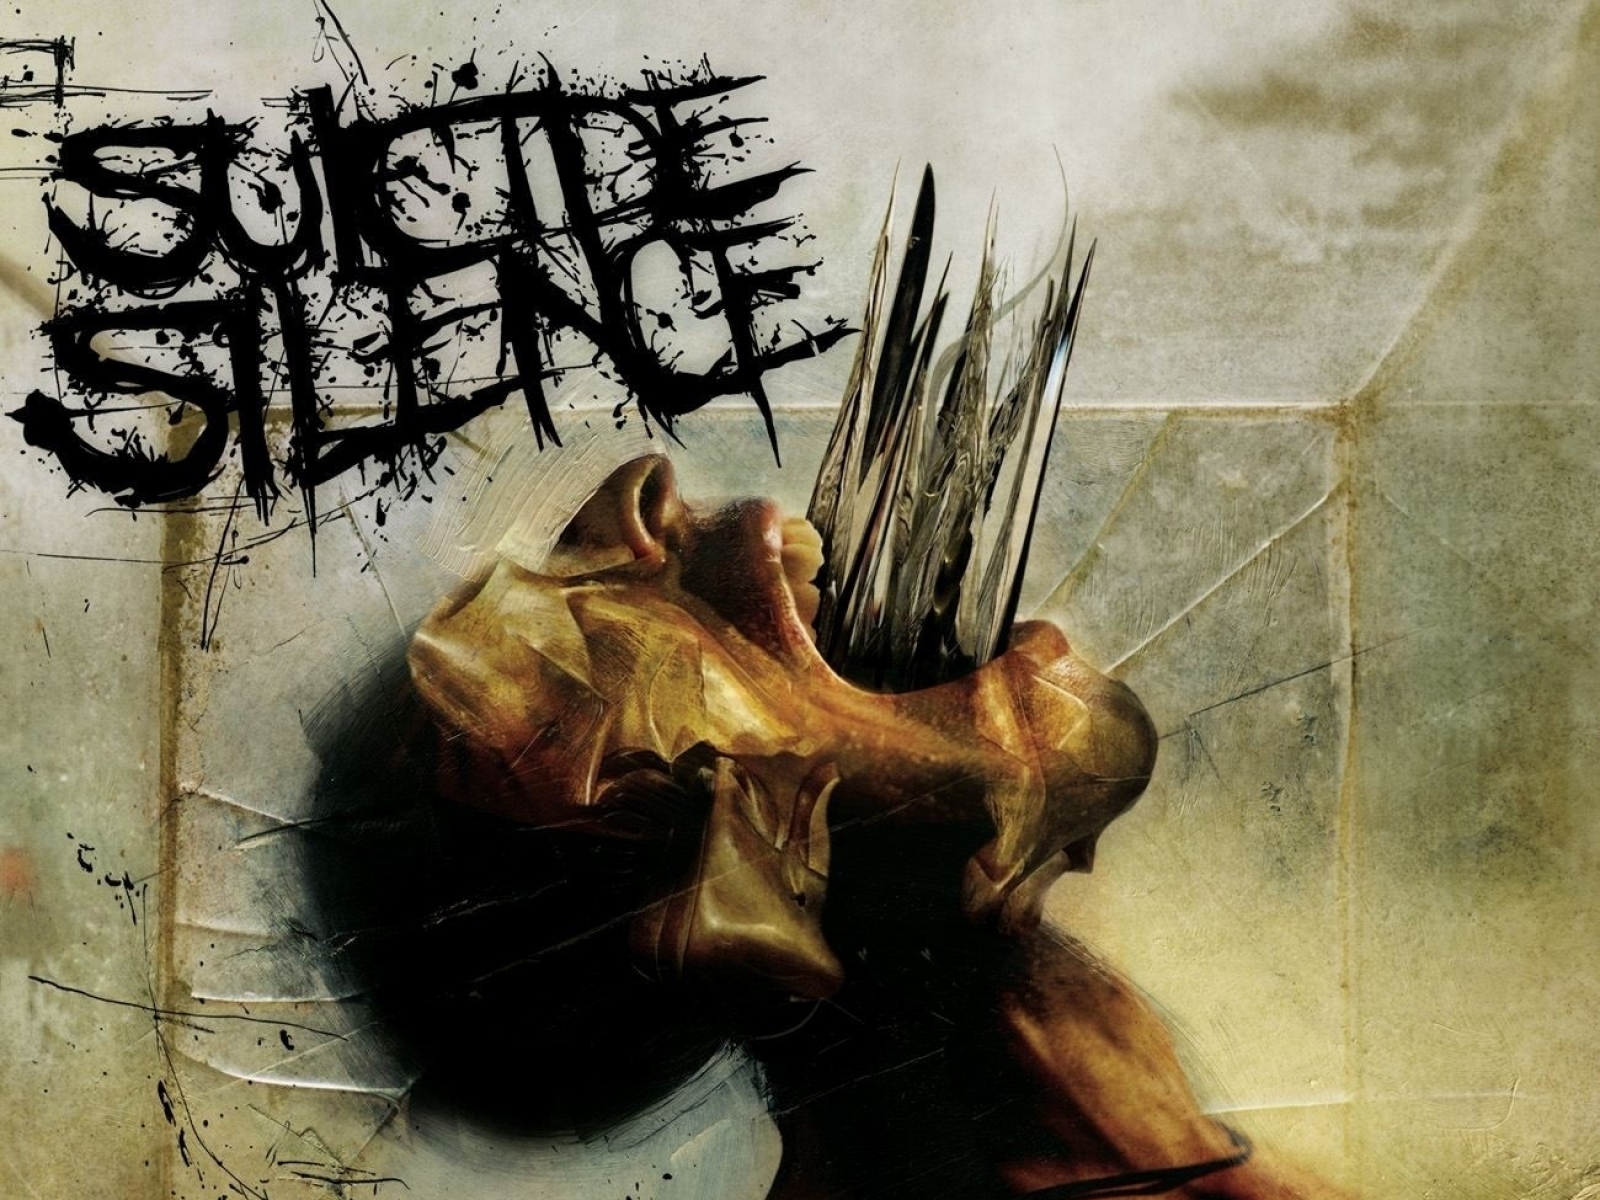 suicide silence, heavy metal, deathcore, music, hard rock wallpaper for mobile